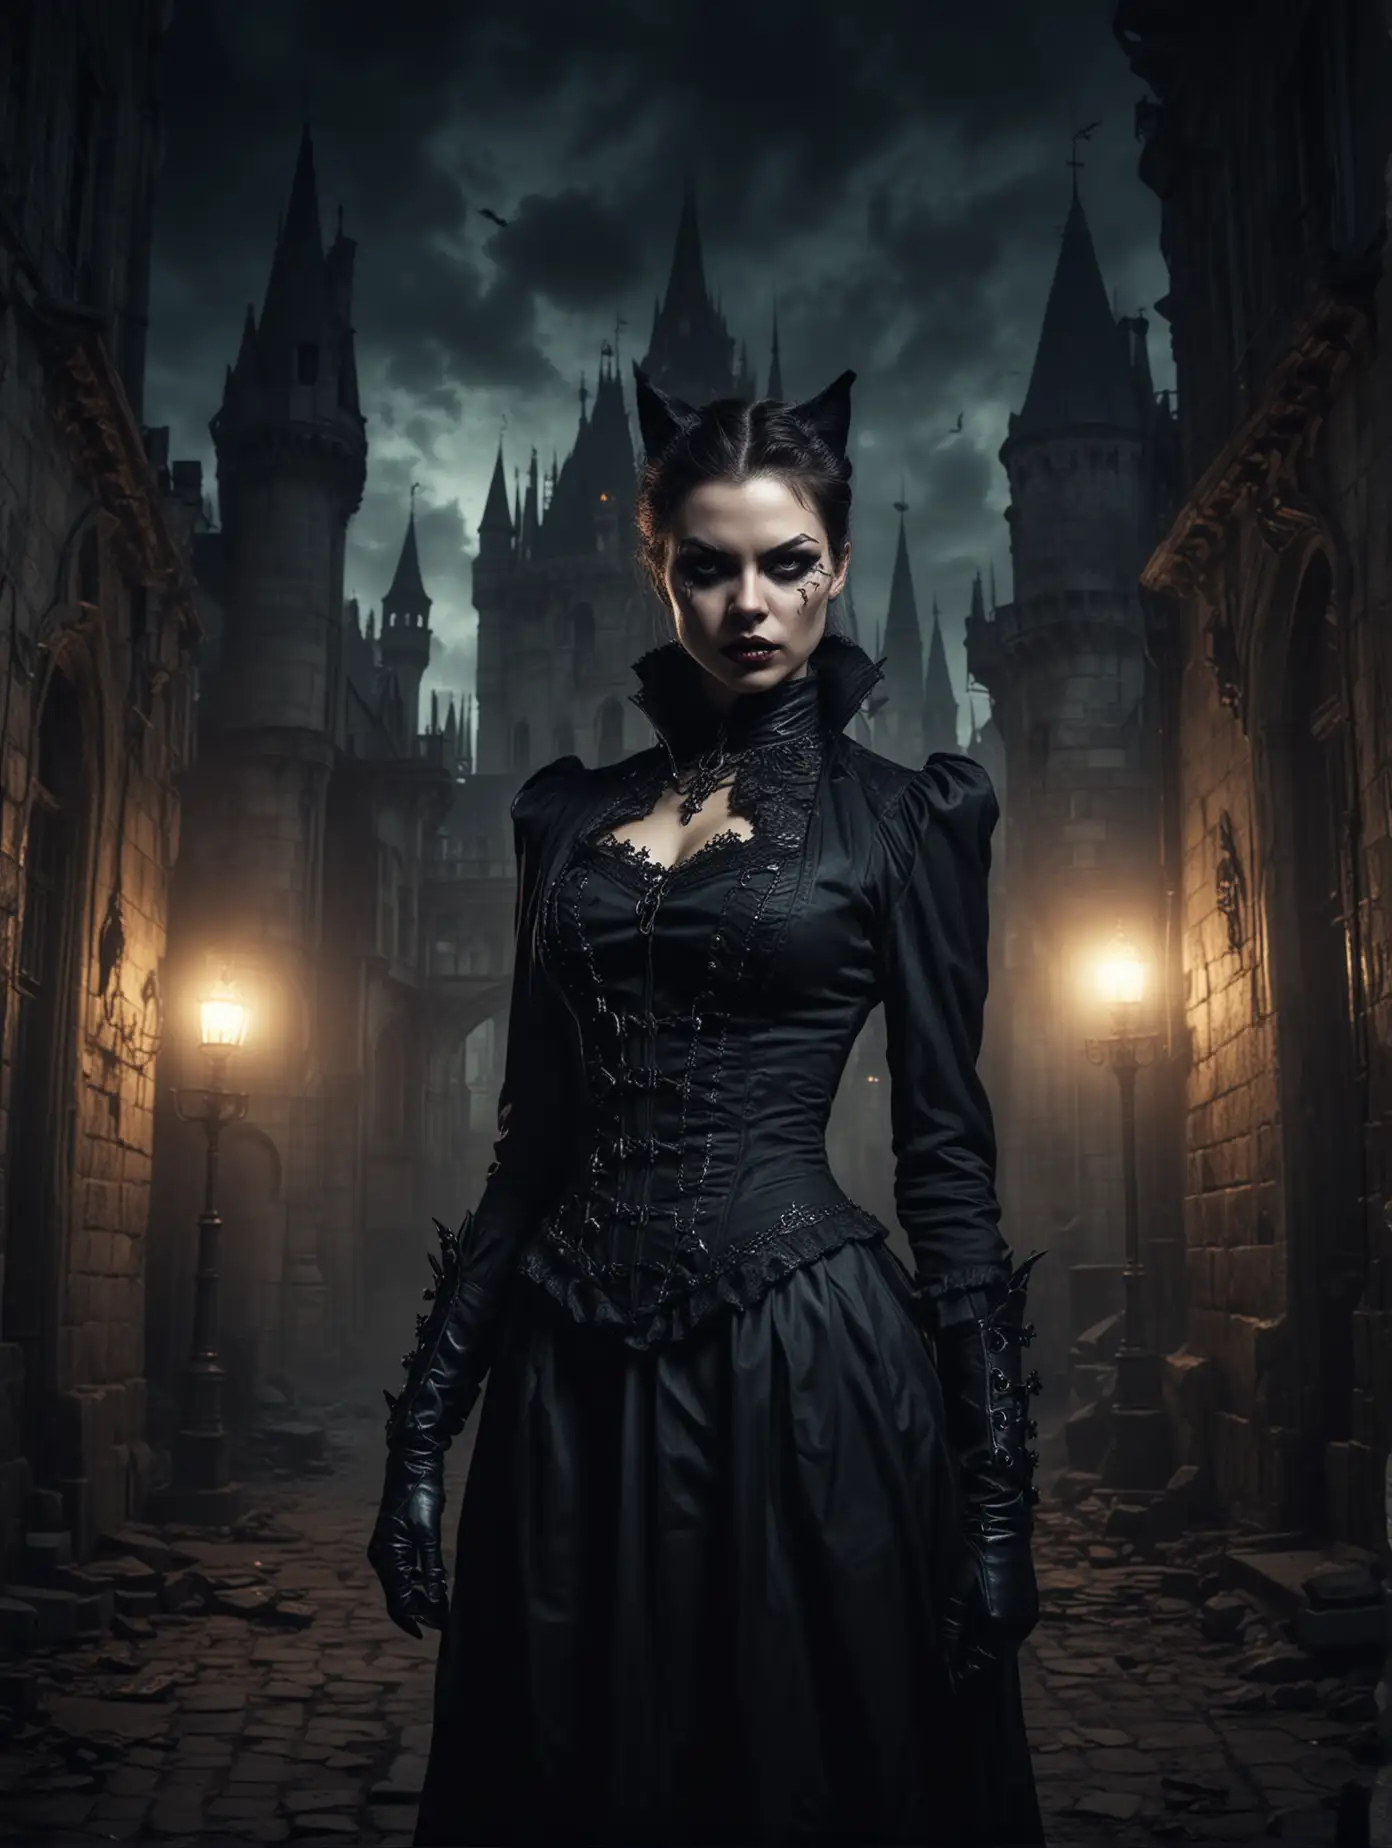 Sinister-Catwoman-Vampire-in-Victorian-Baroque-Punk-Dark-Fantasy-Style-at-Haunted-Castle